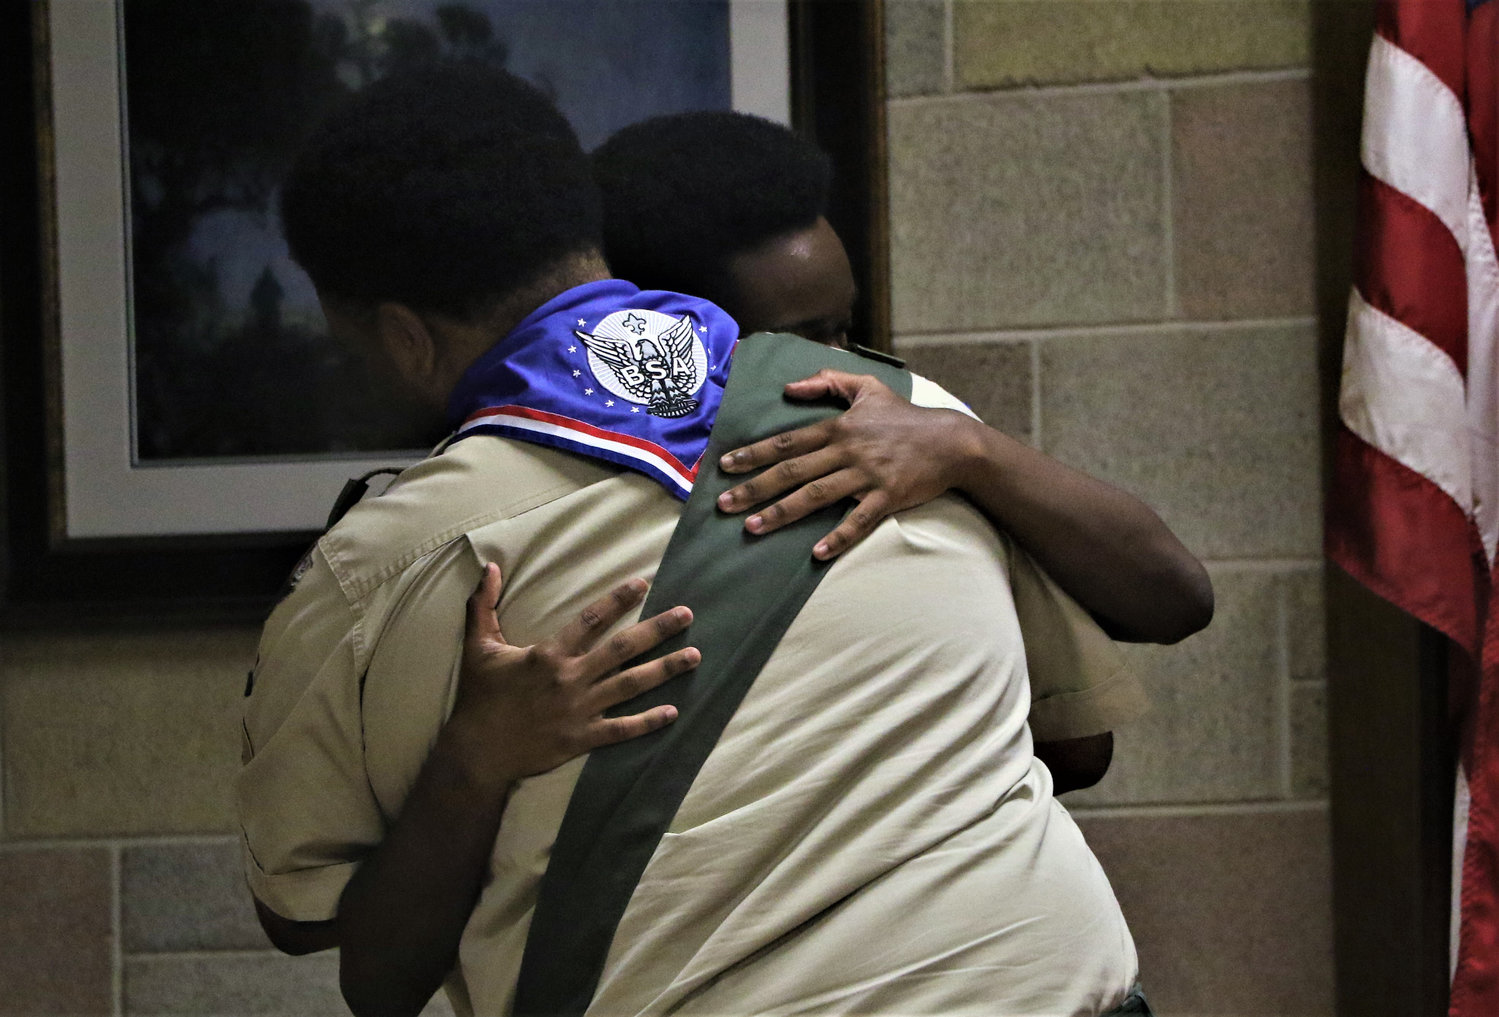 Master of Ceremonies and Eagle Scout Kenneth Bradley receives a big hug and thanks from his brother Trevor J. Bradley.